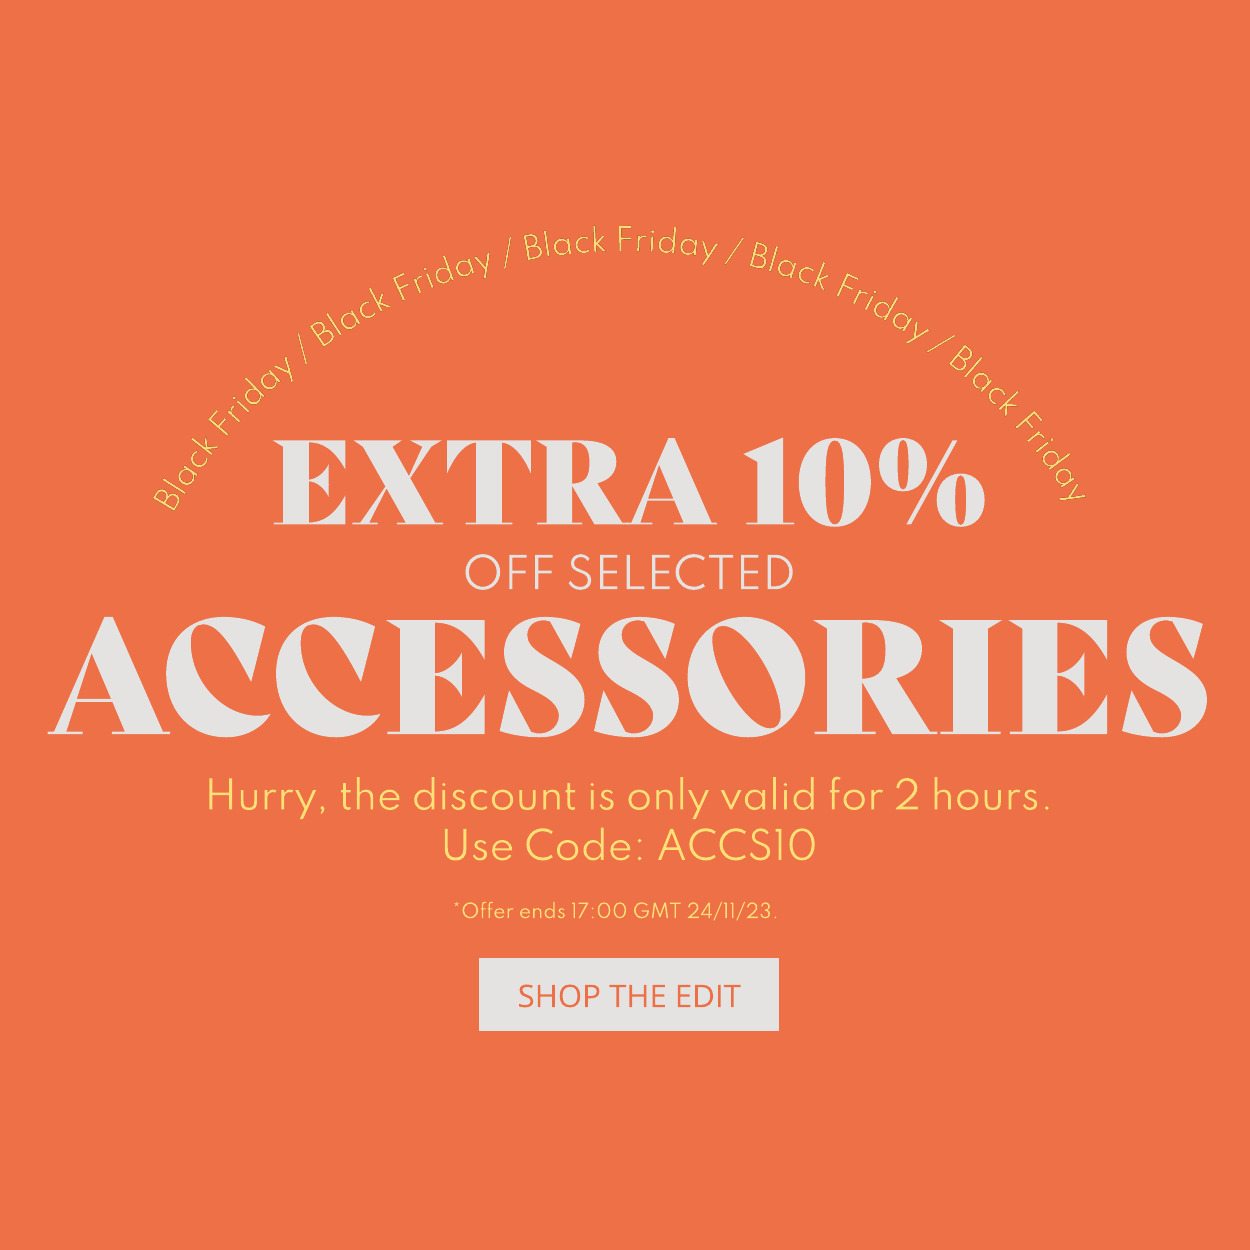 Extra 10% off when you use the code ACCS10